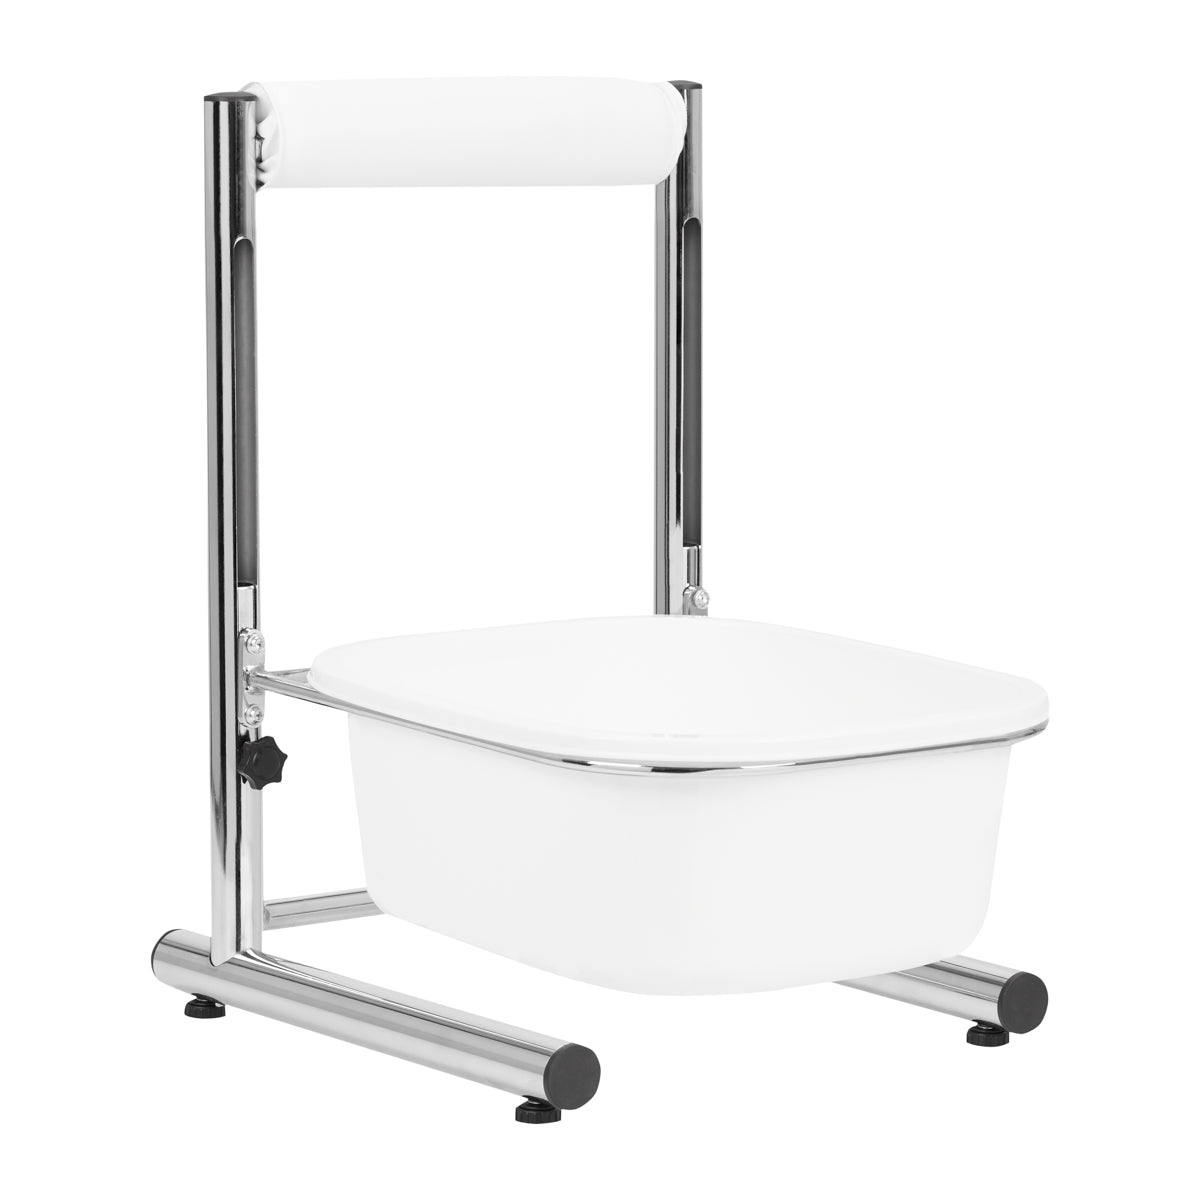 Pedicure tray with adjustable height, chrome